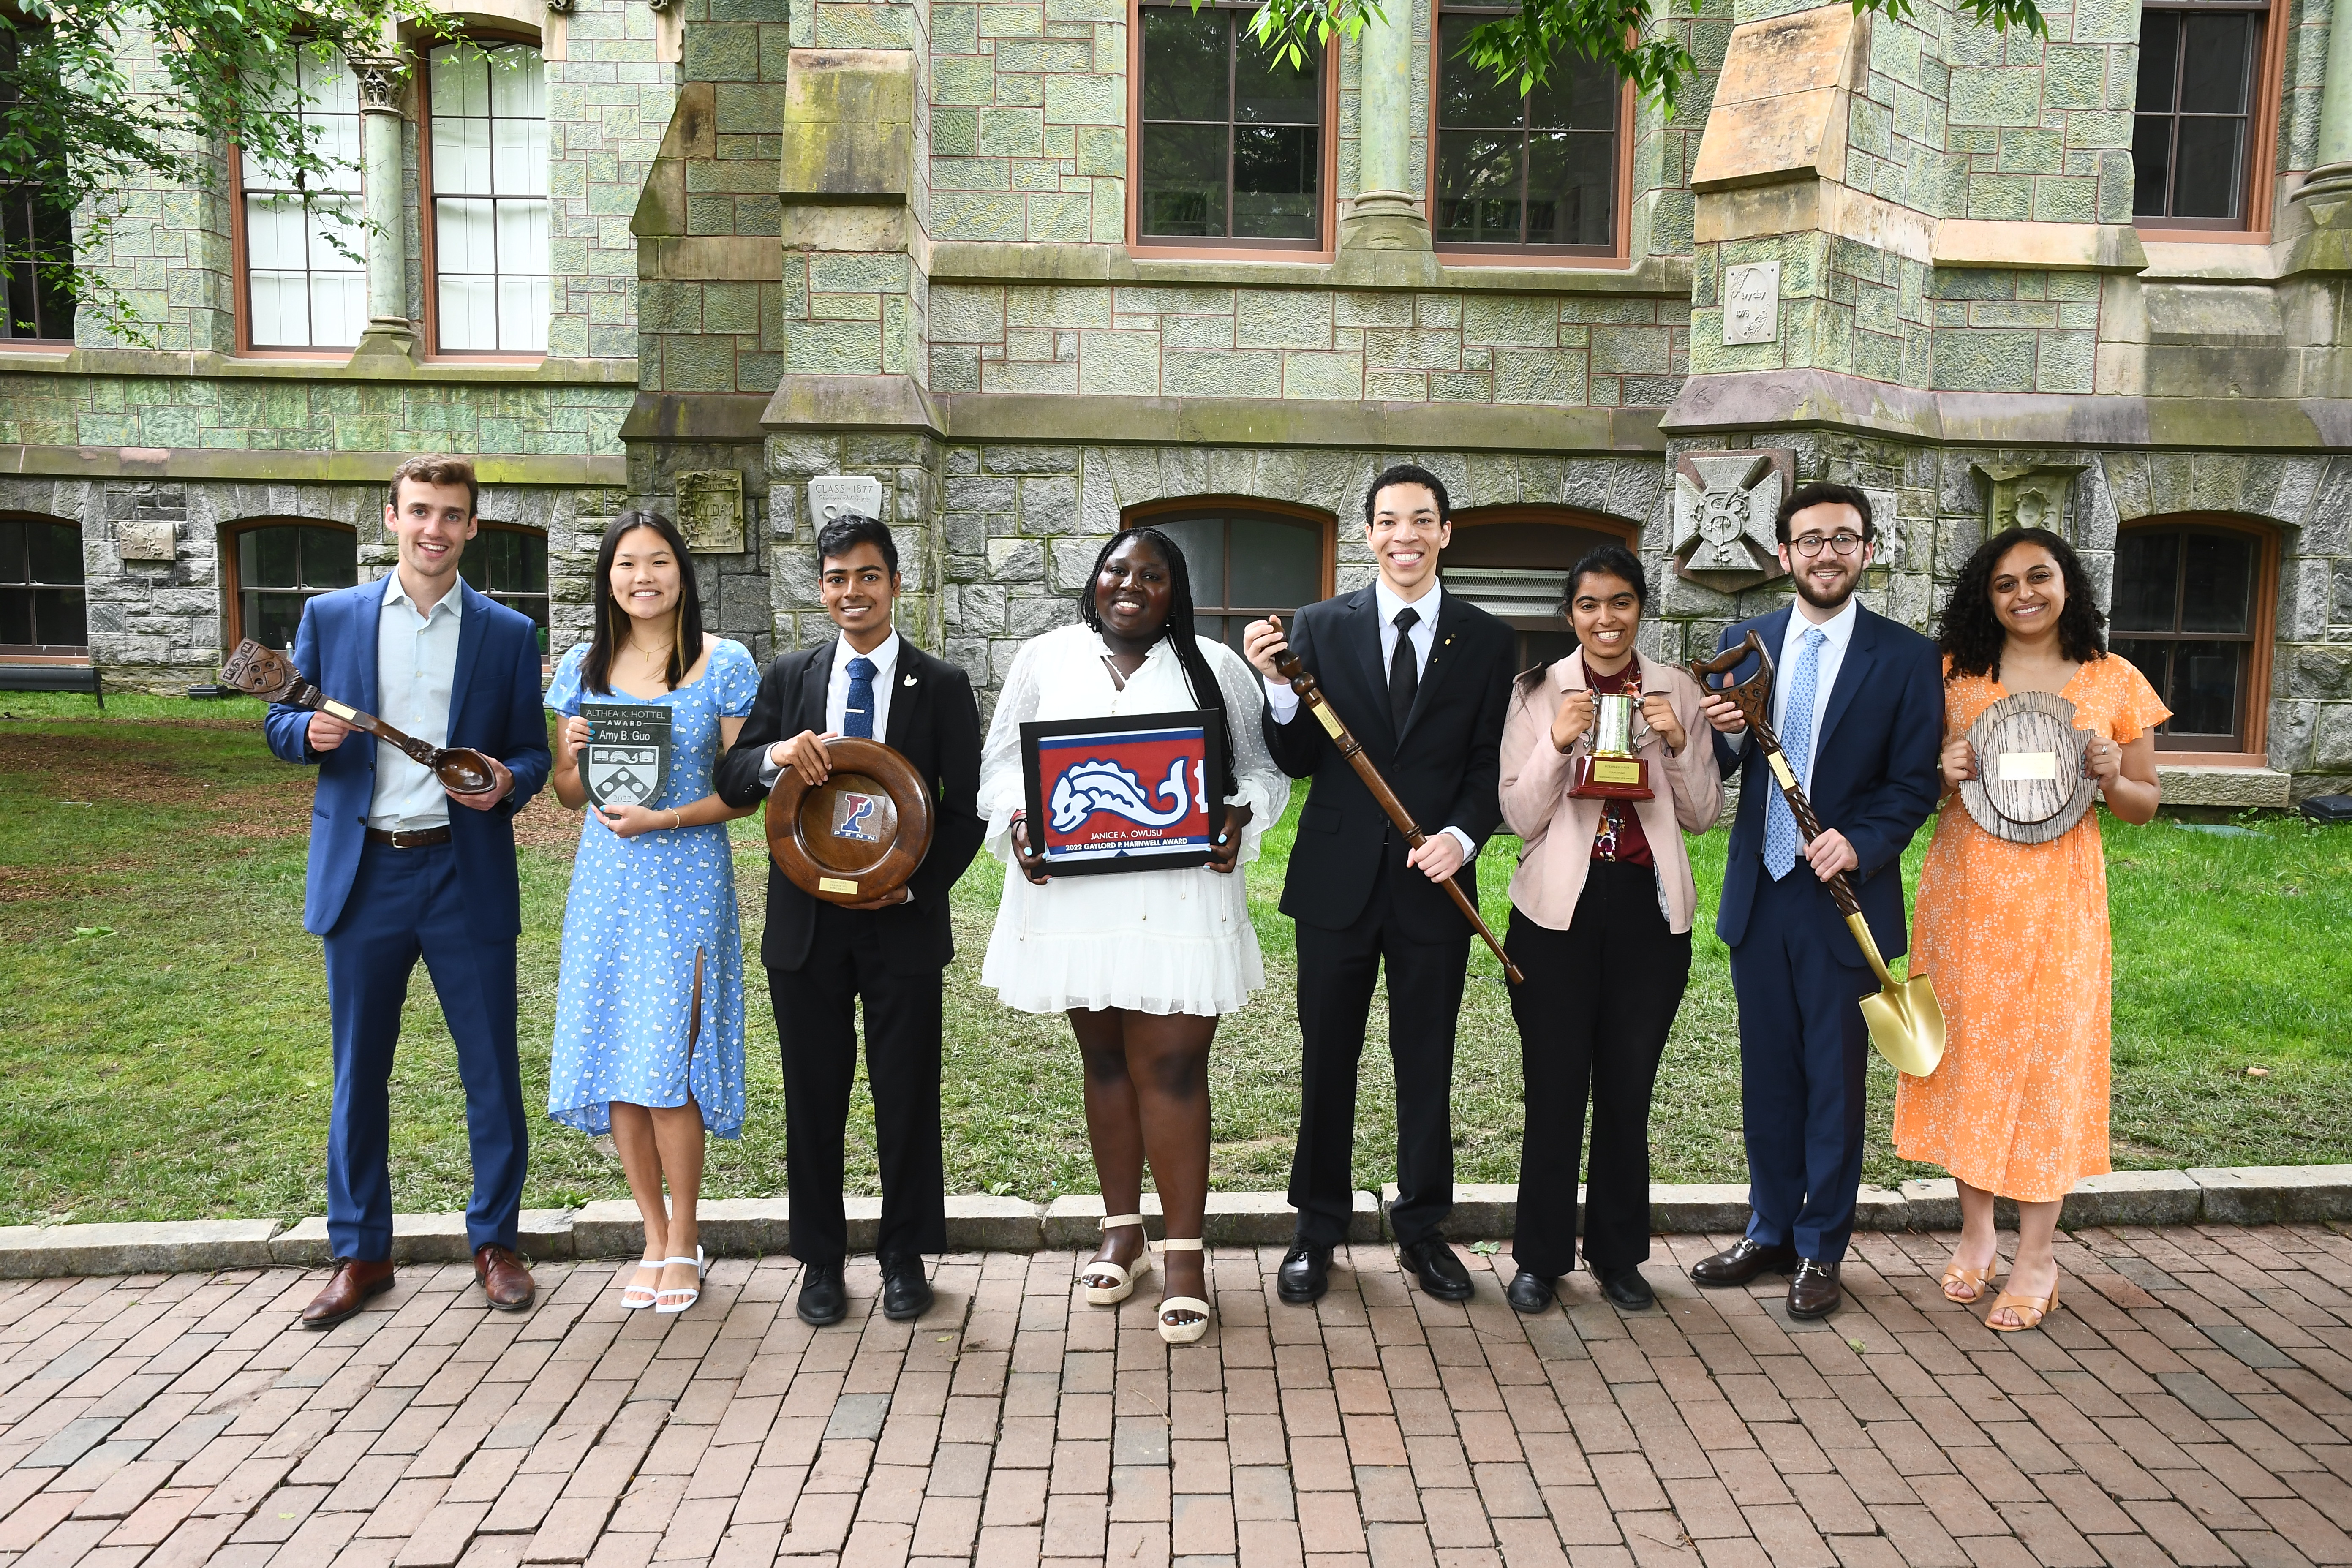 Eight students pose on Locust Walk with plaques and shovels